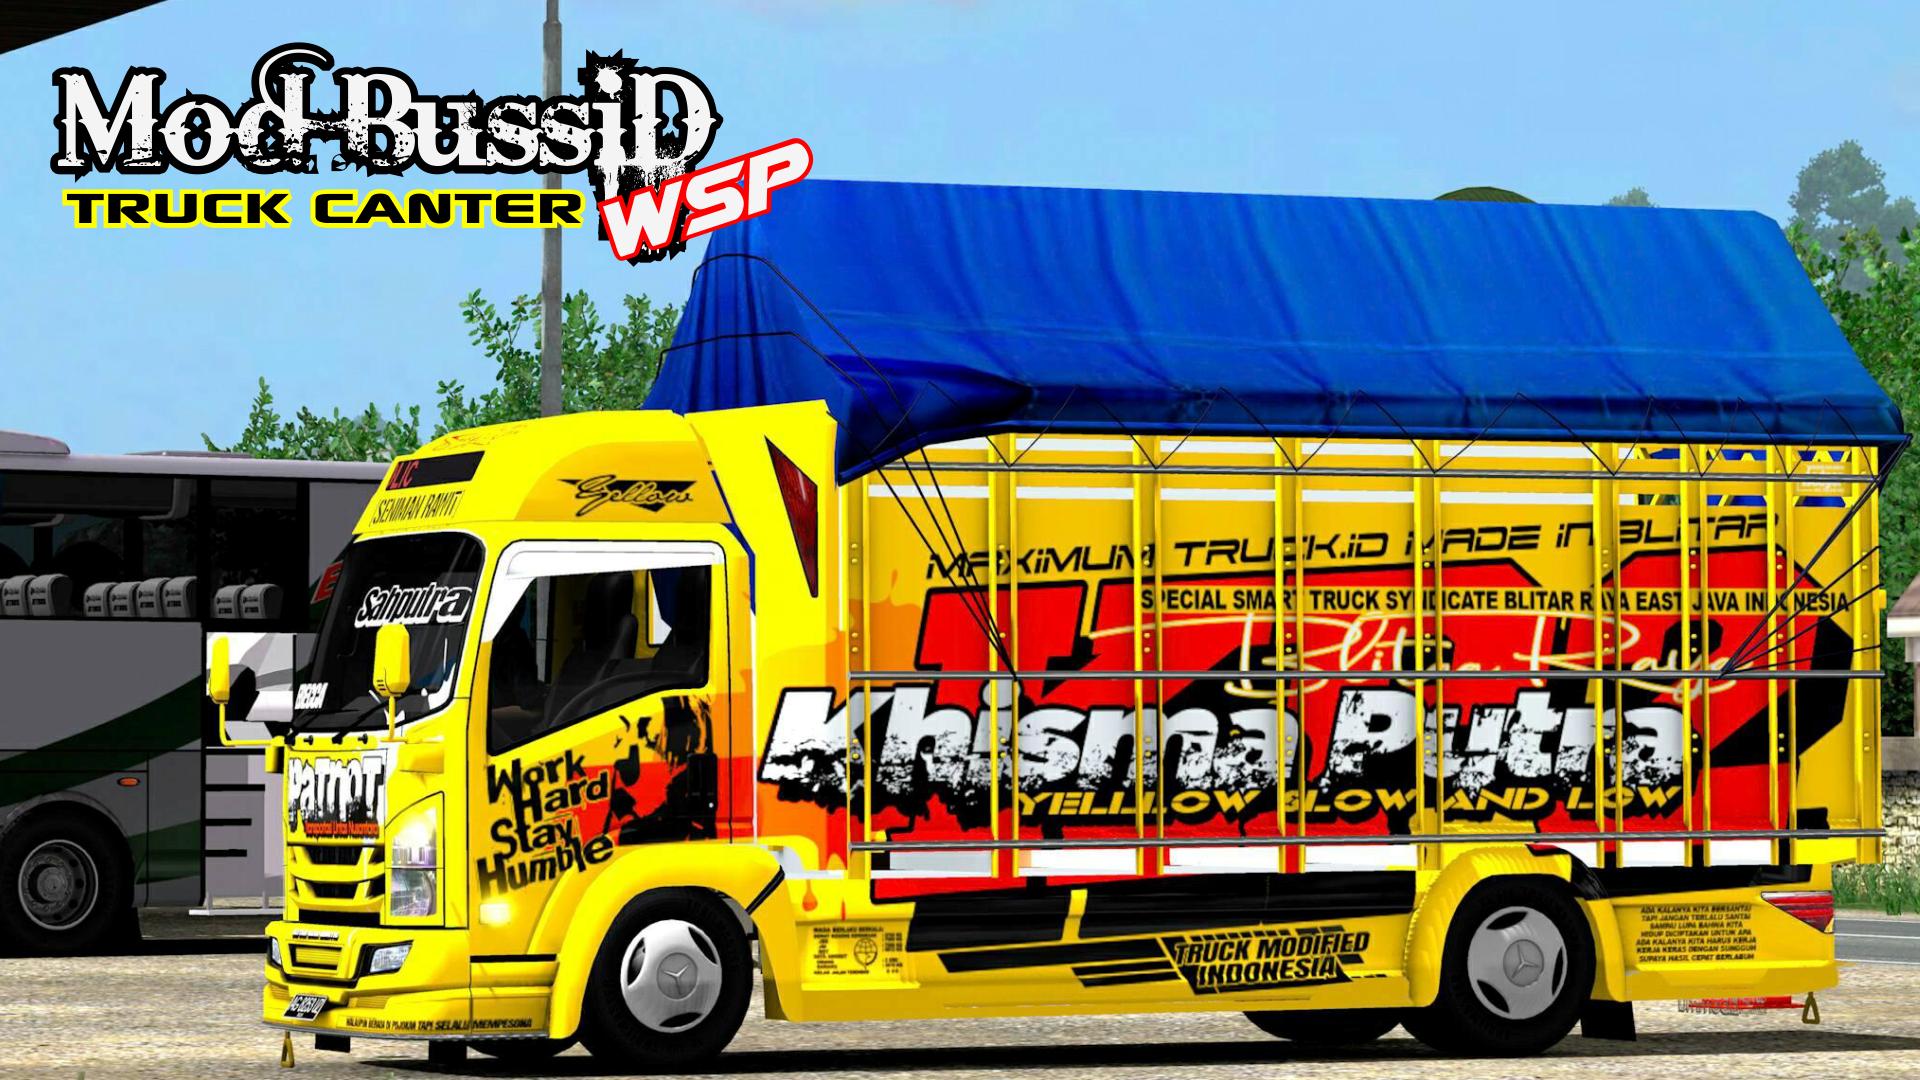 Mod Bussid Truck Canter WSP for Android - APK Download